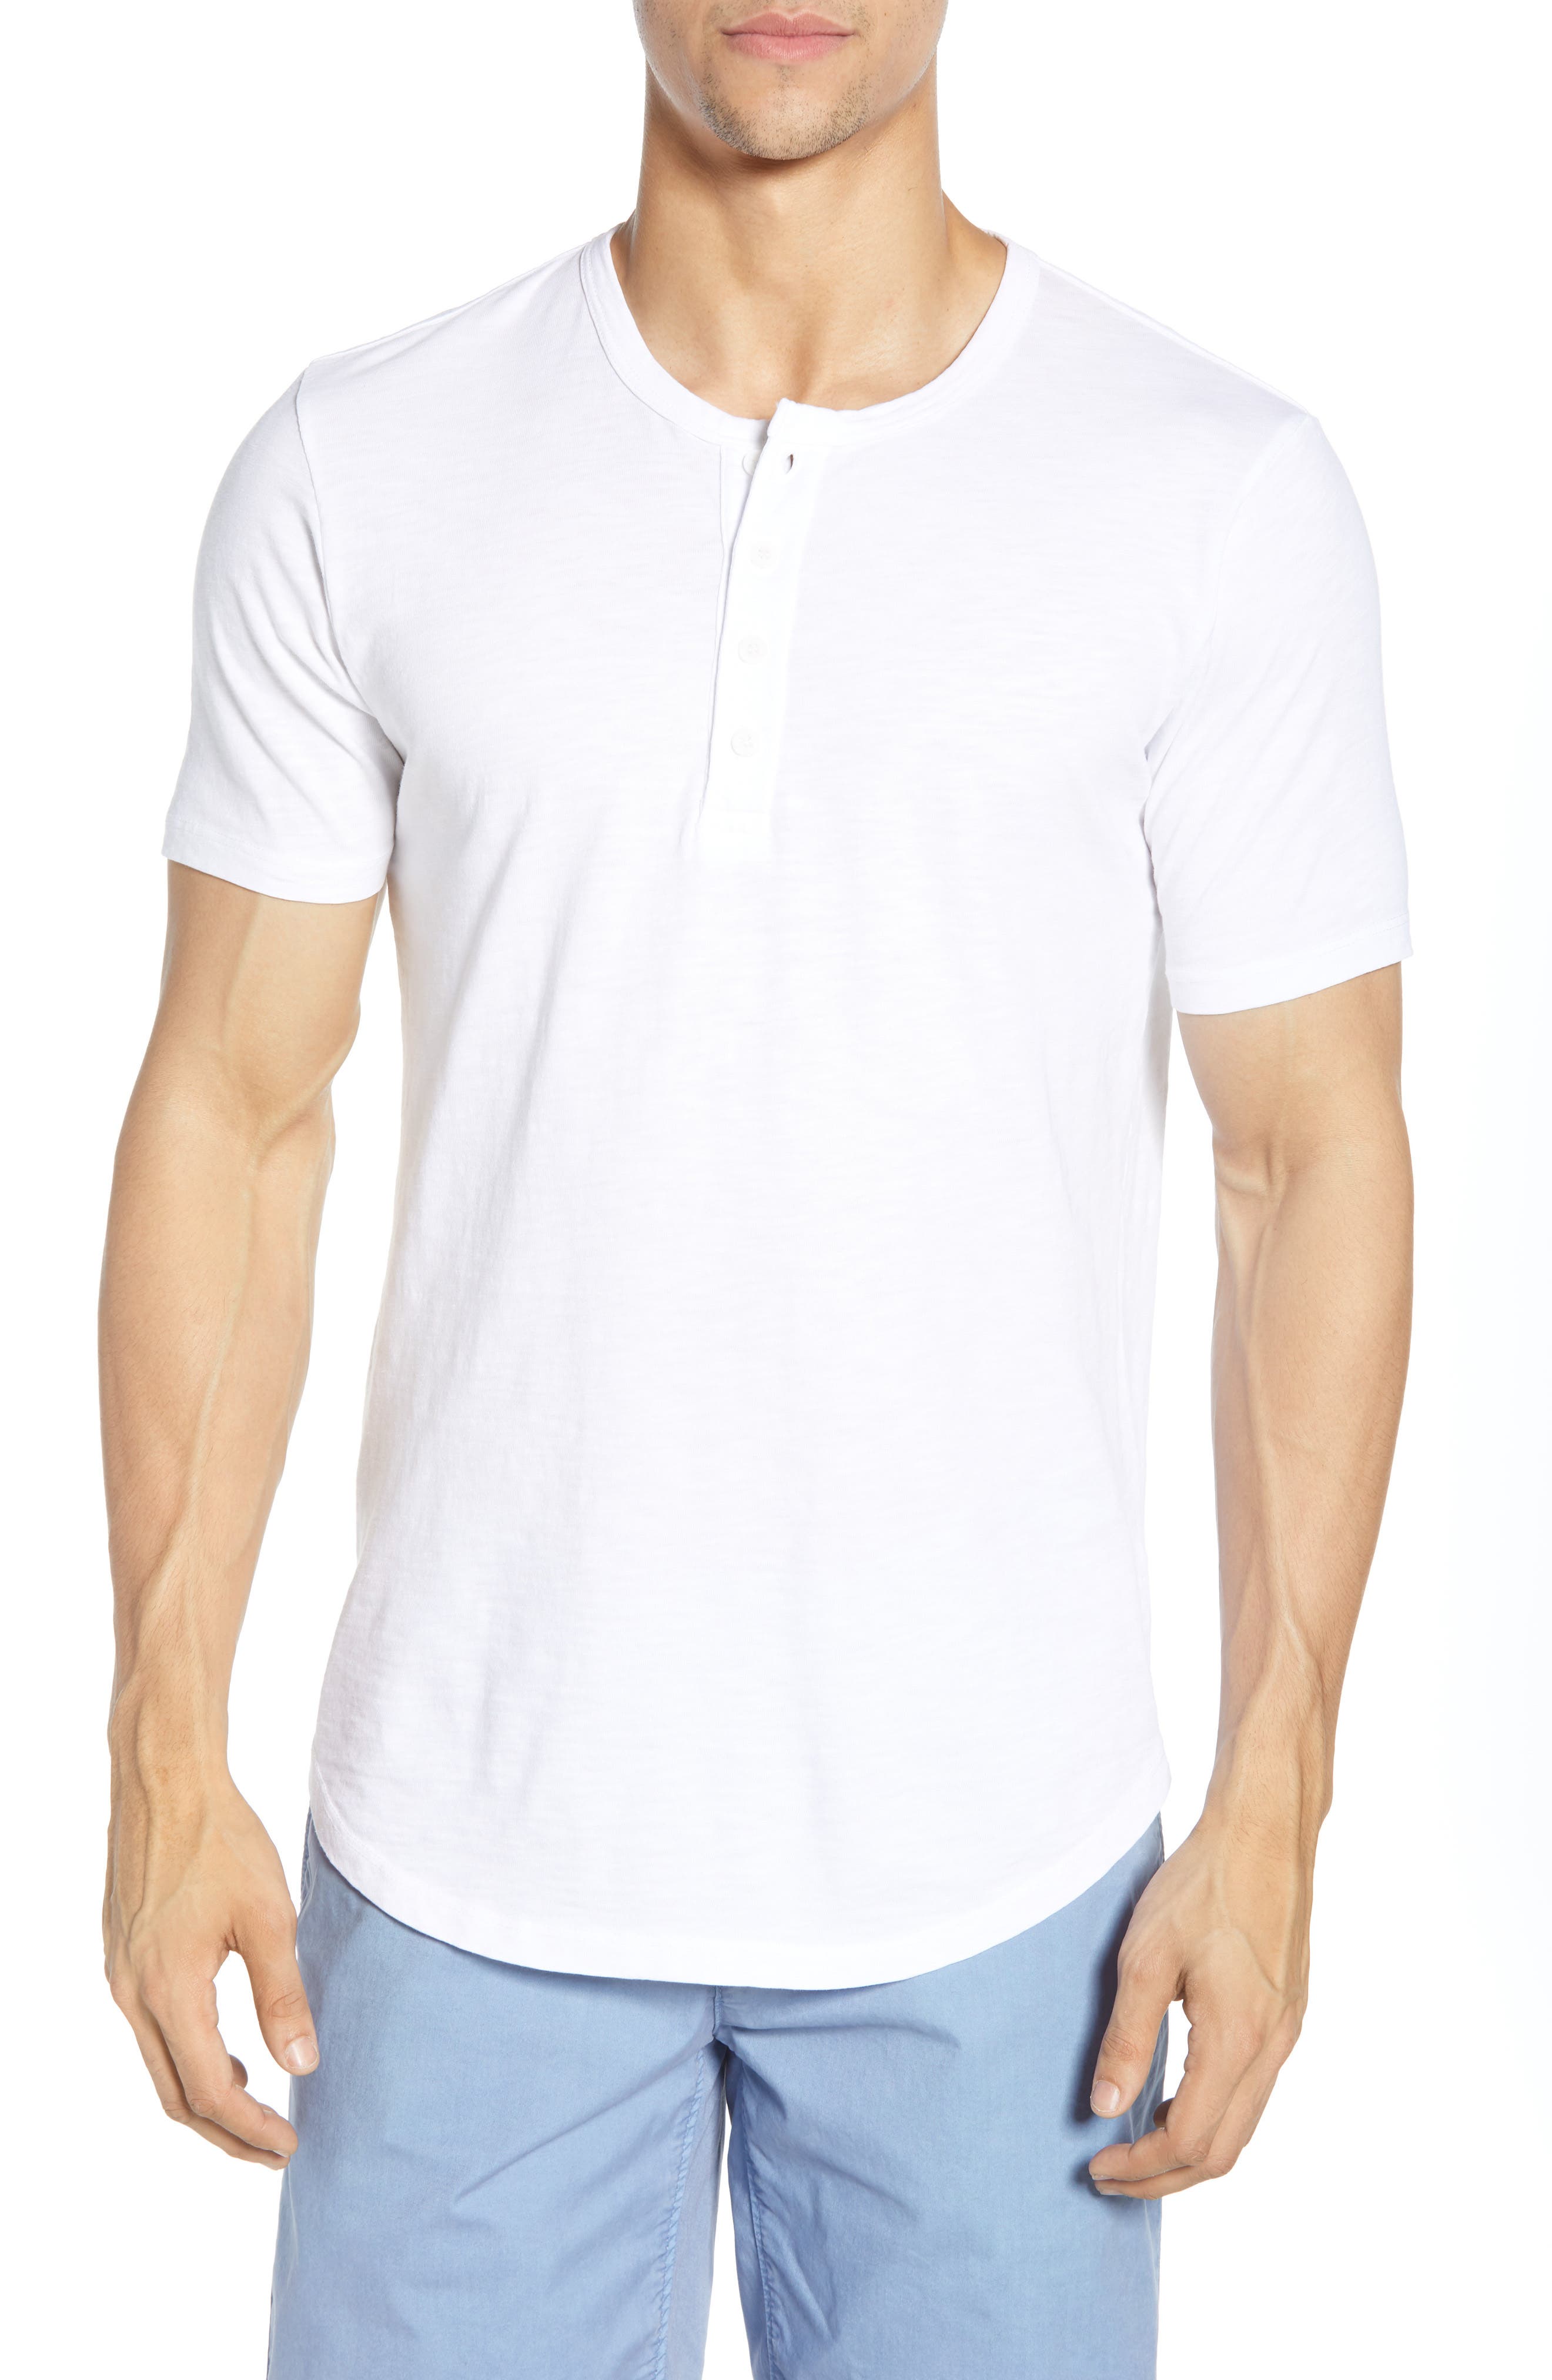 henley shirt athletic fit